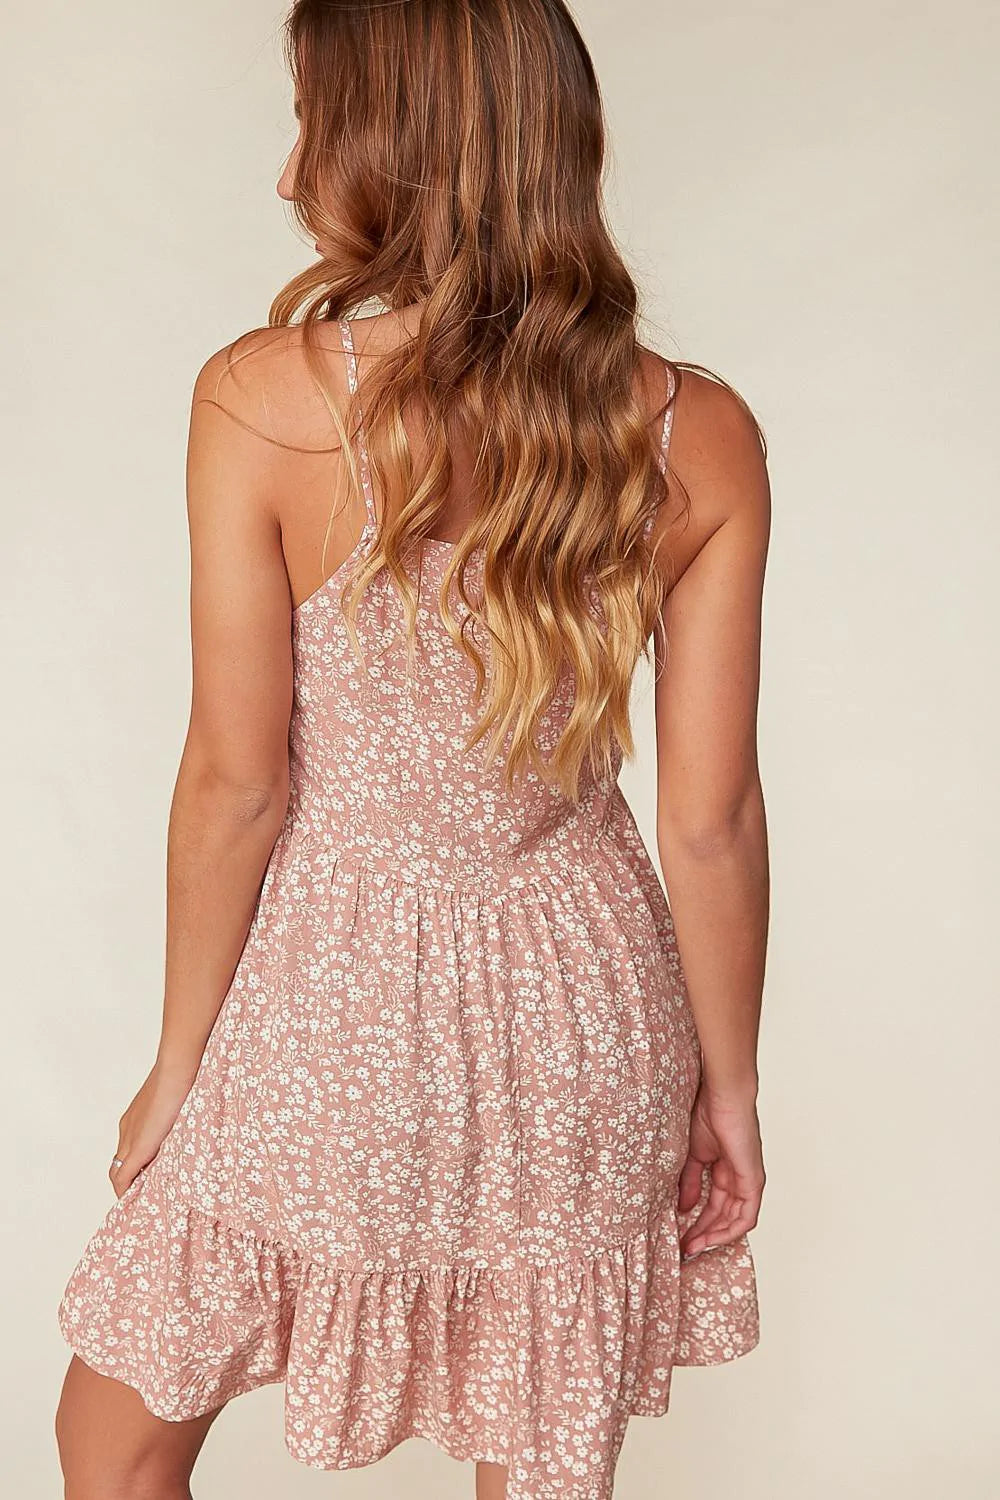 Dusty Rose Woven Dress with Pockets